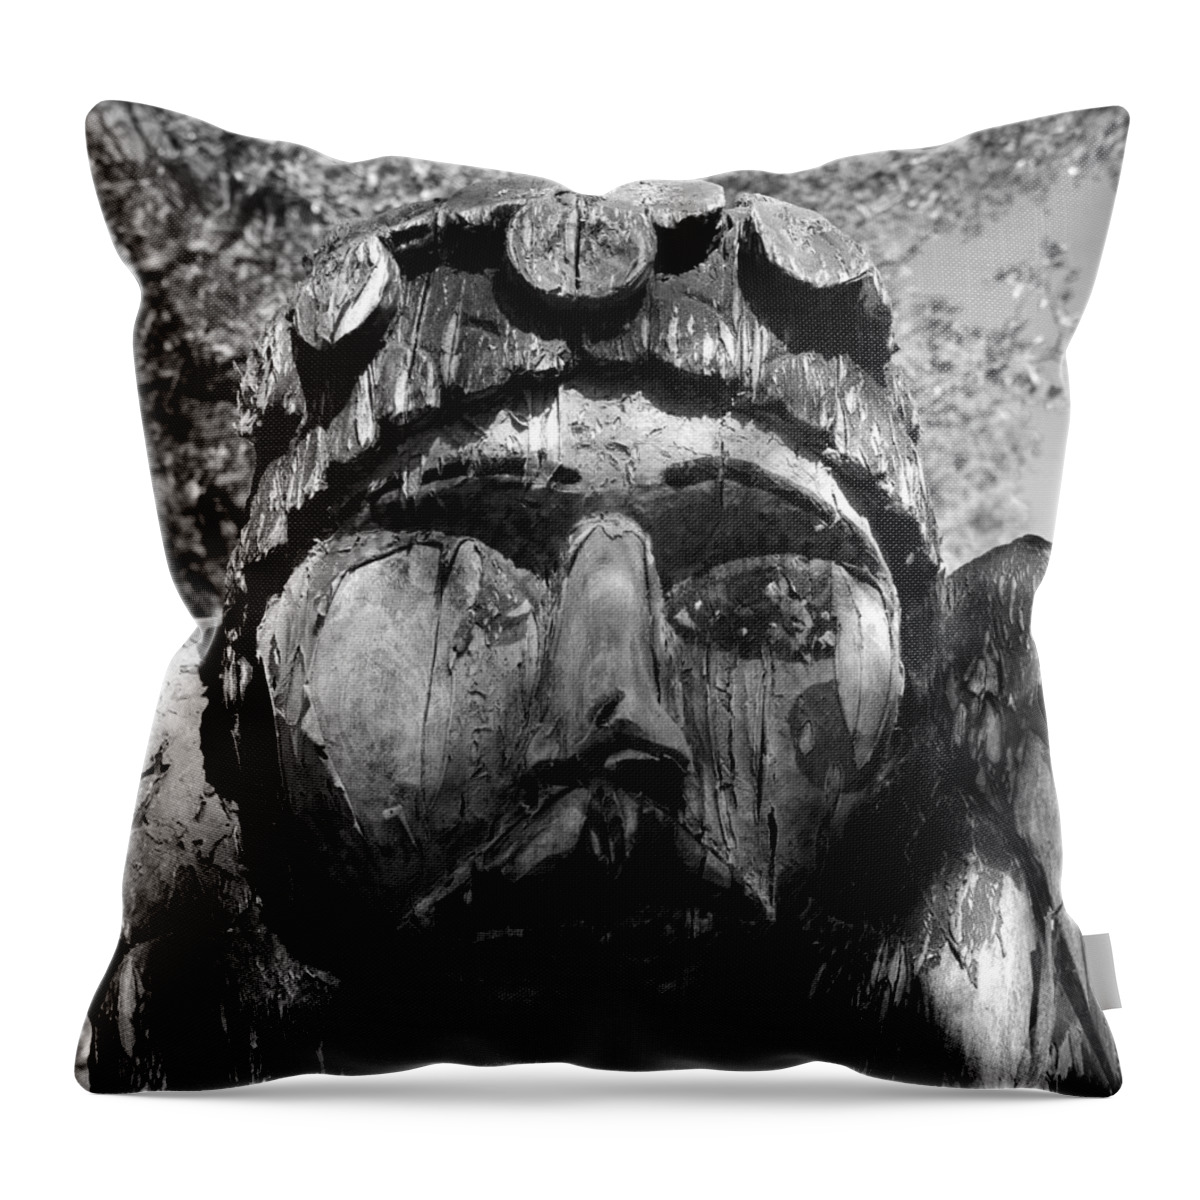 Fading Beauty Throw Pillow featuring the photograph Fading beauty by David Lee Thompson